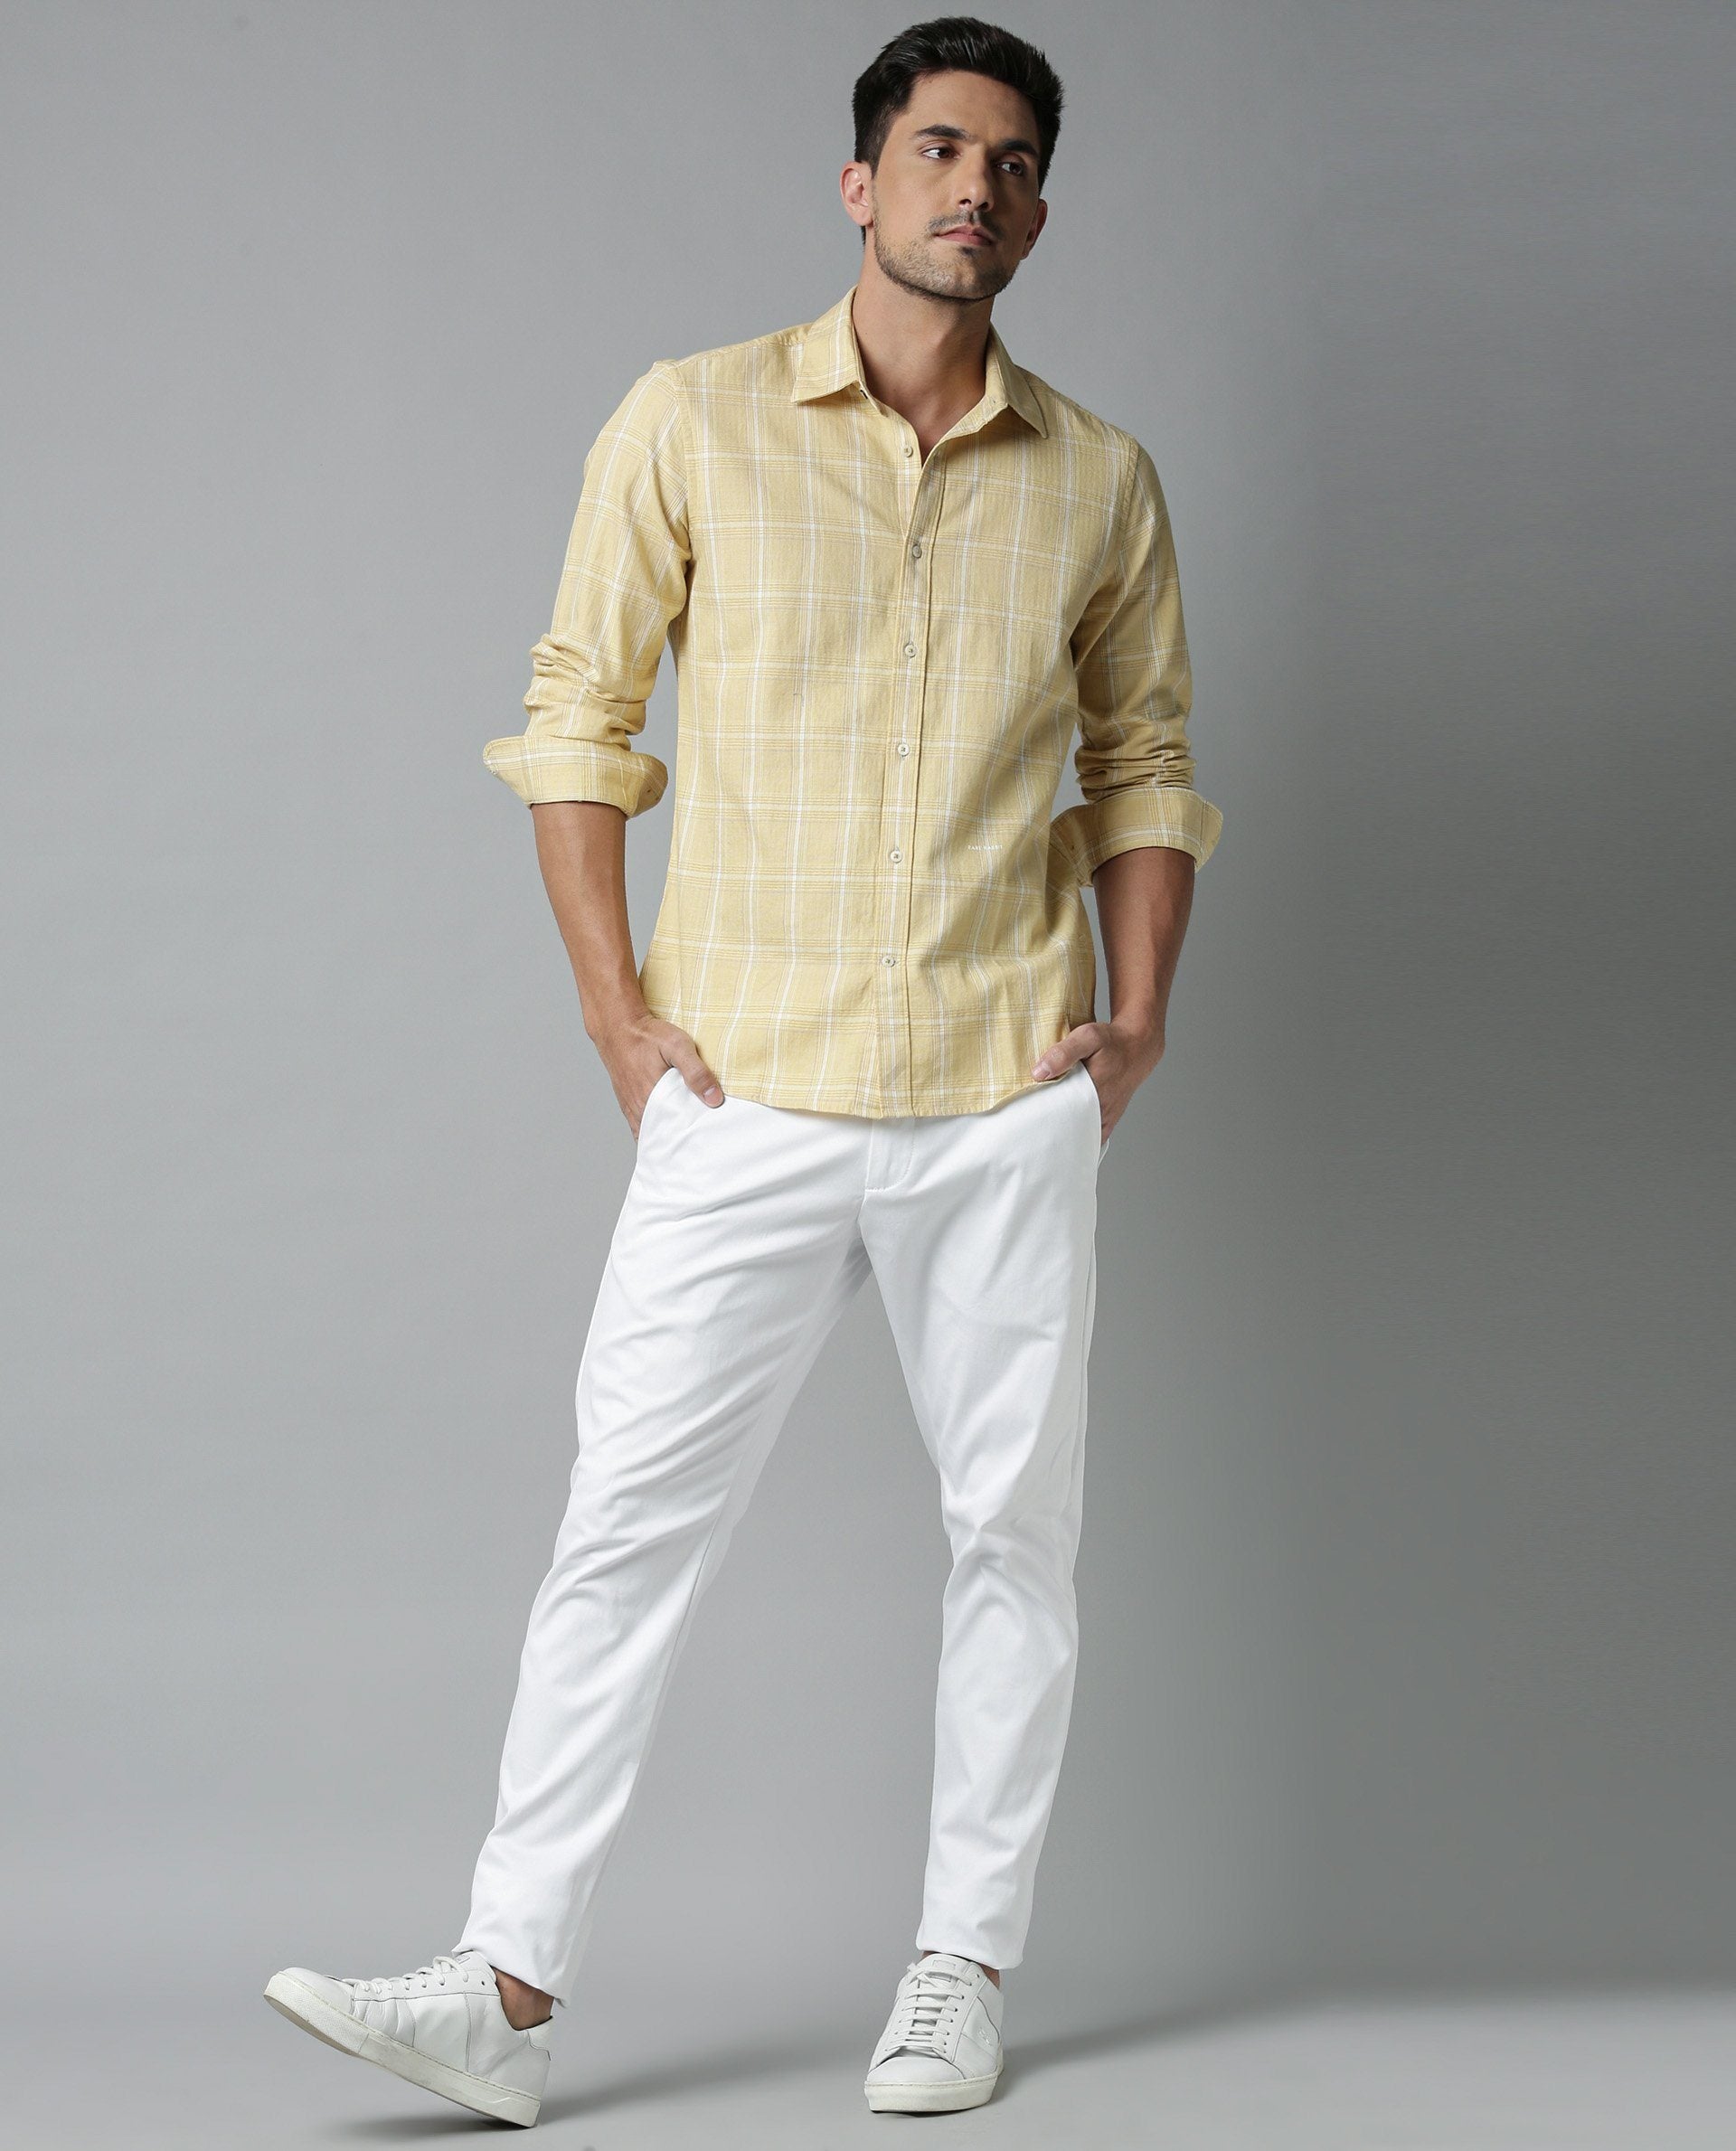 Mens Yellow Pants Outfits35 Best Ways to Wear Yellow Pants  Mens yellow  pants Mens outfits Light blue dress shirt